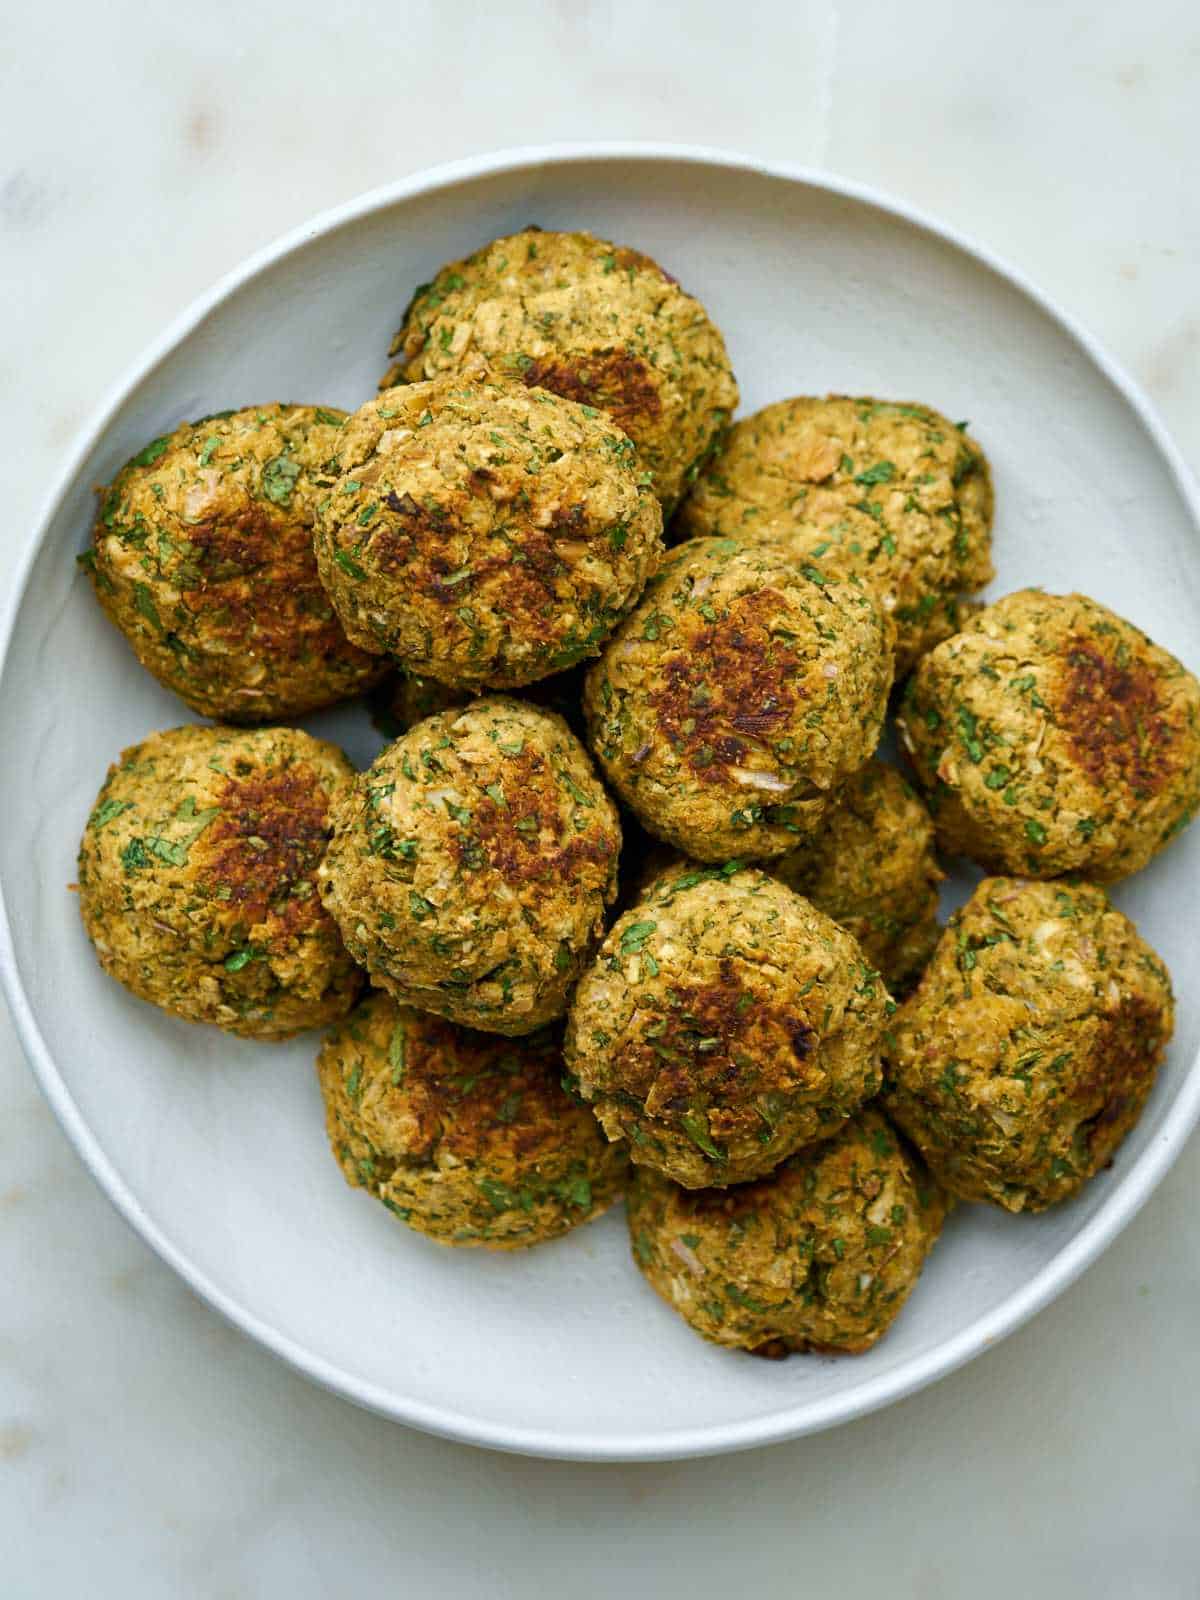 Plate filled with falafel.